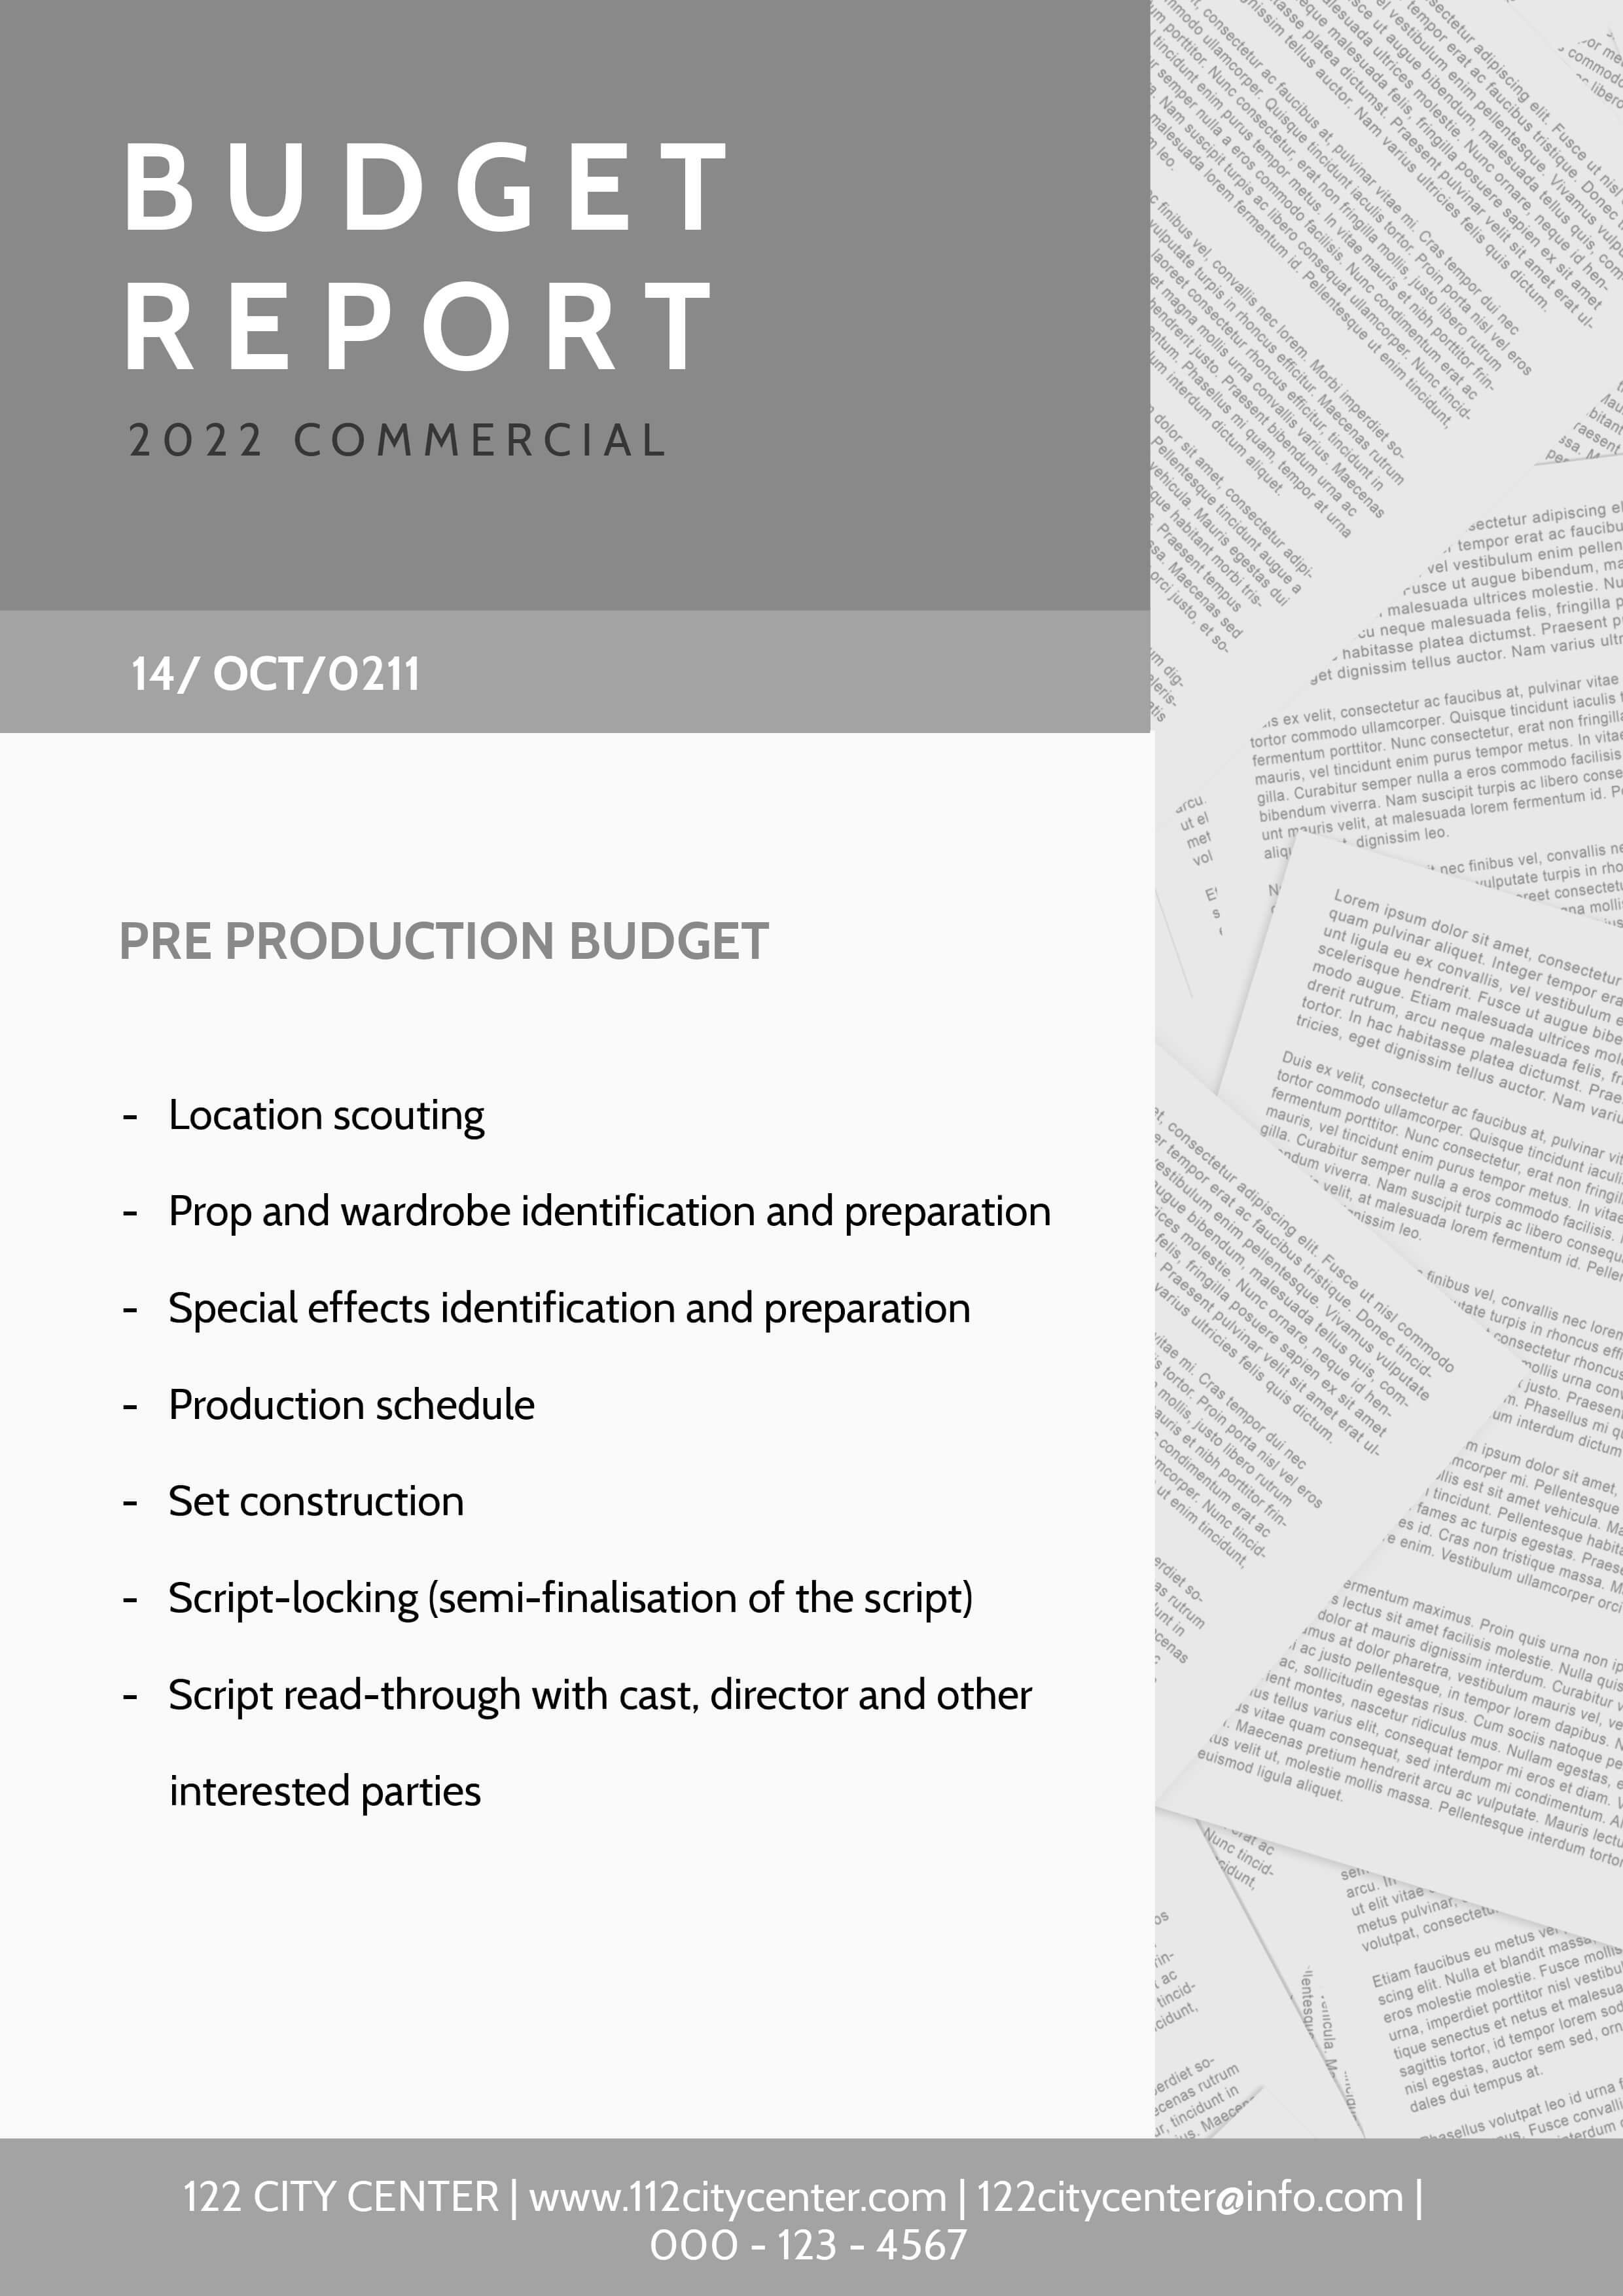 Commercial planner template for pre production budget - How to produce a commercial on a tight budget: A detailed 9-step guide - Image